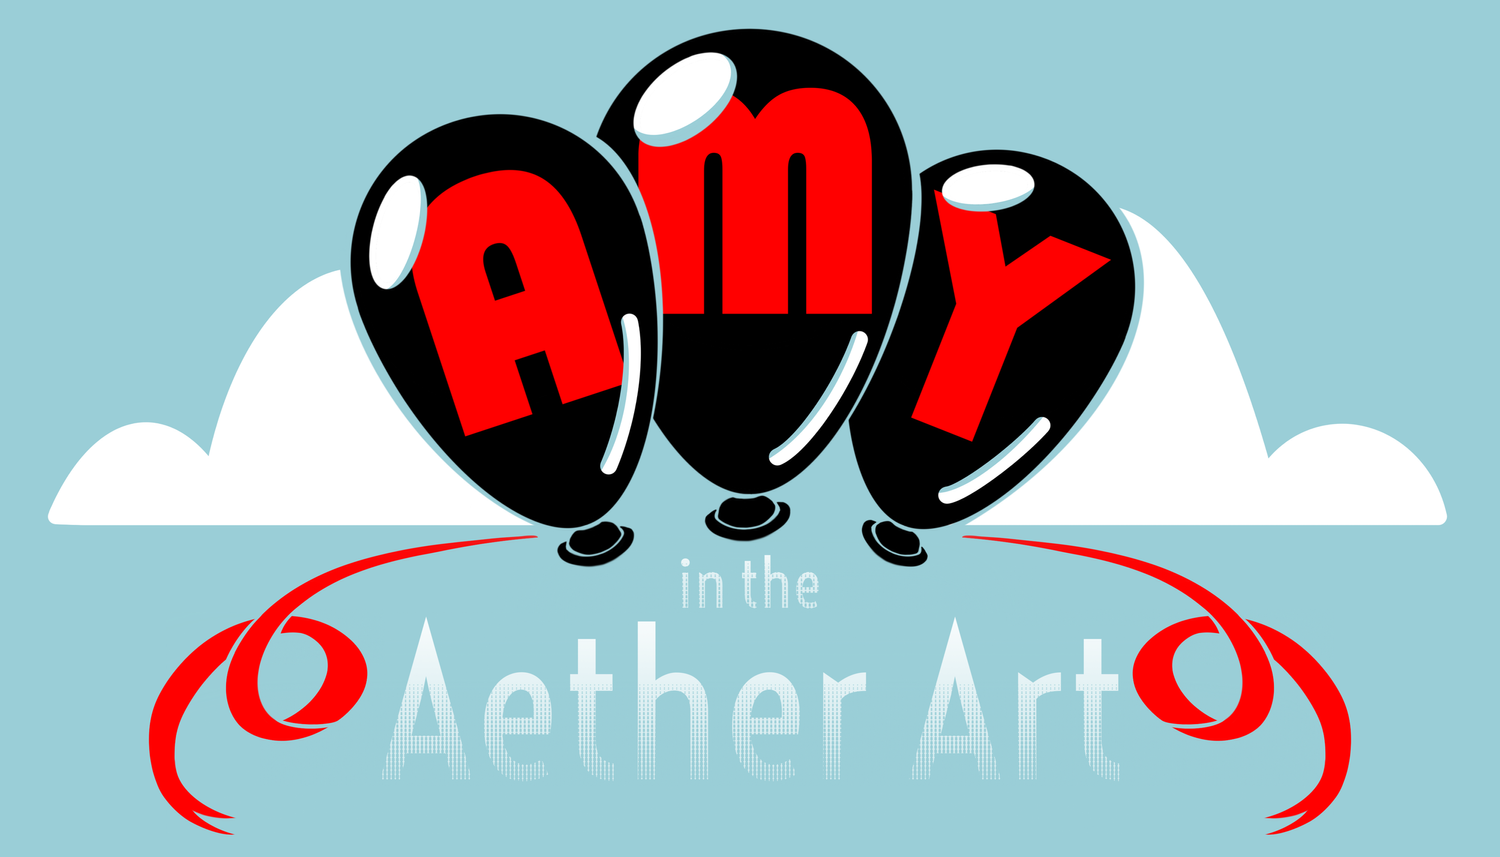 Amy in the Aether Art